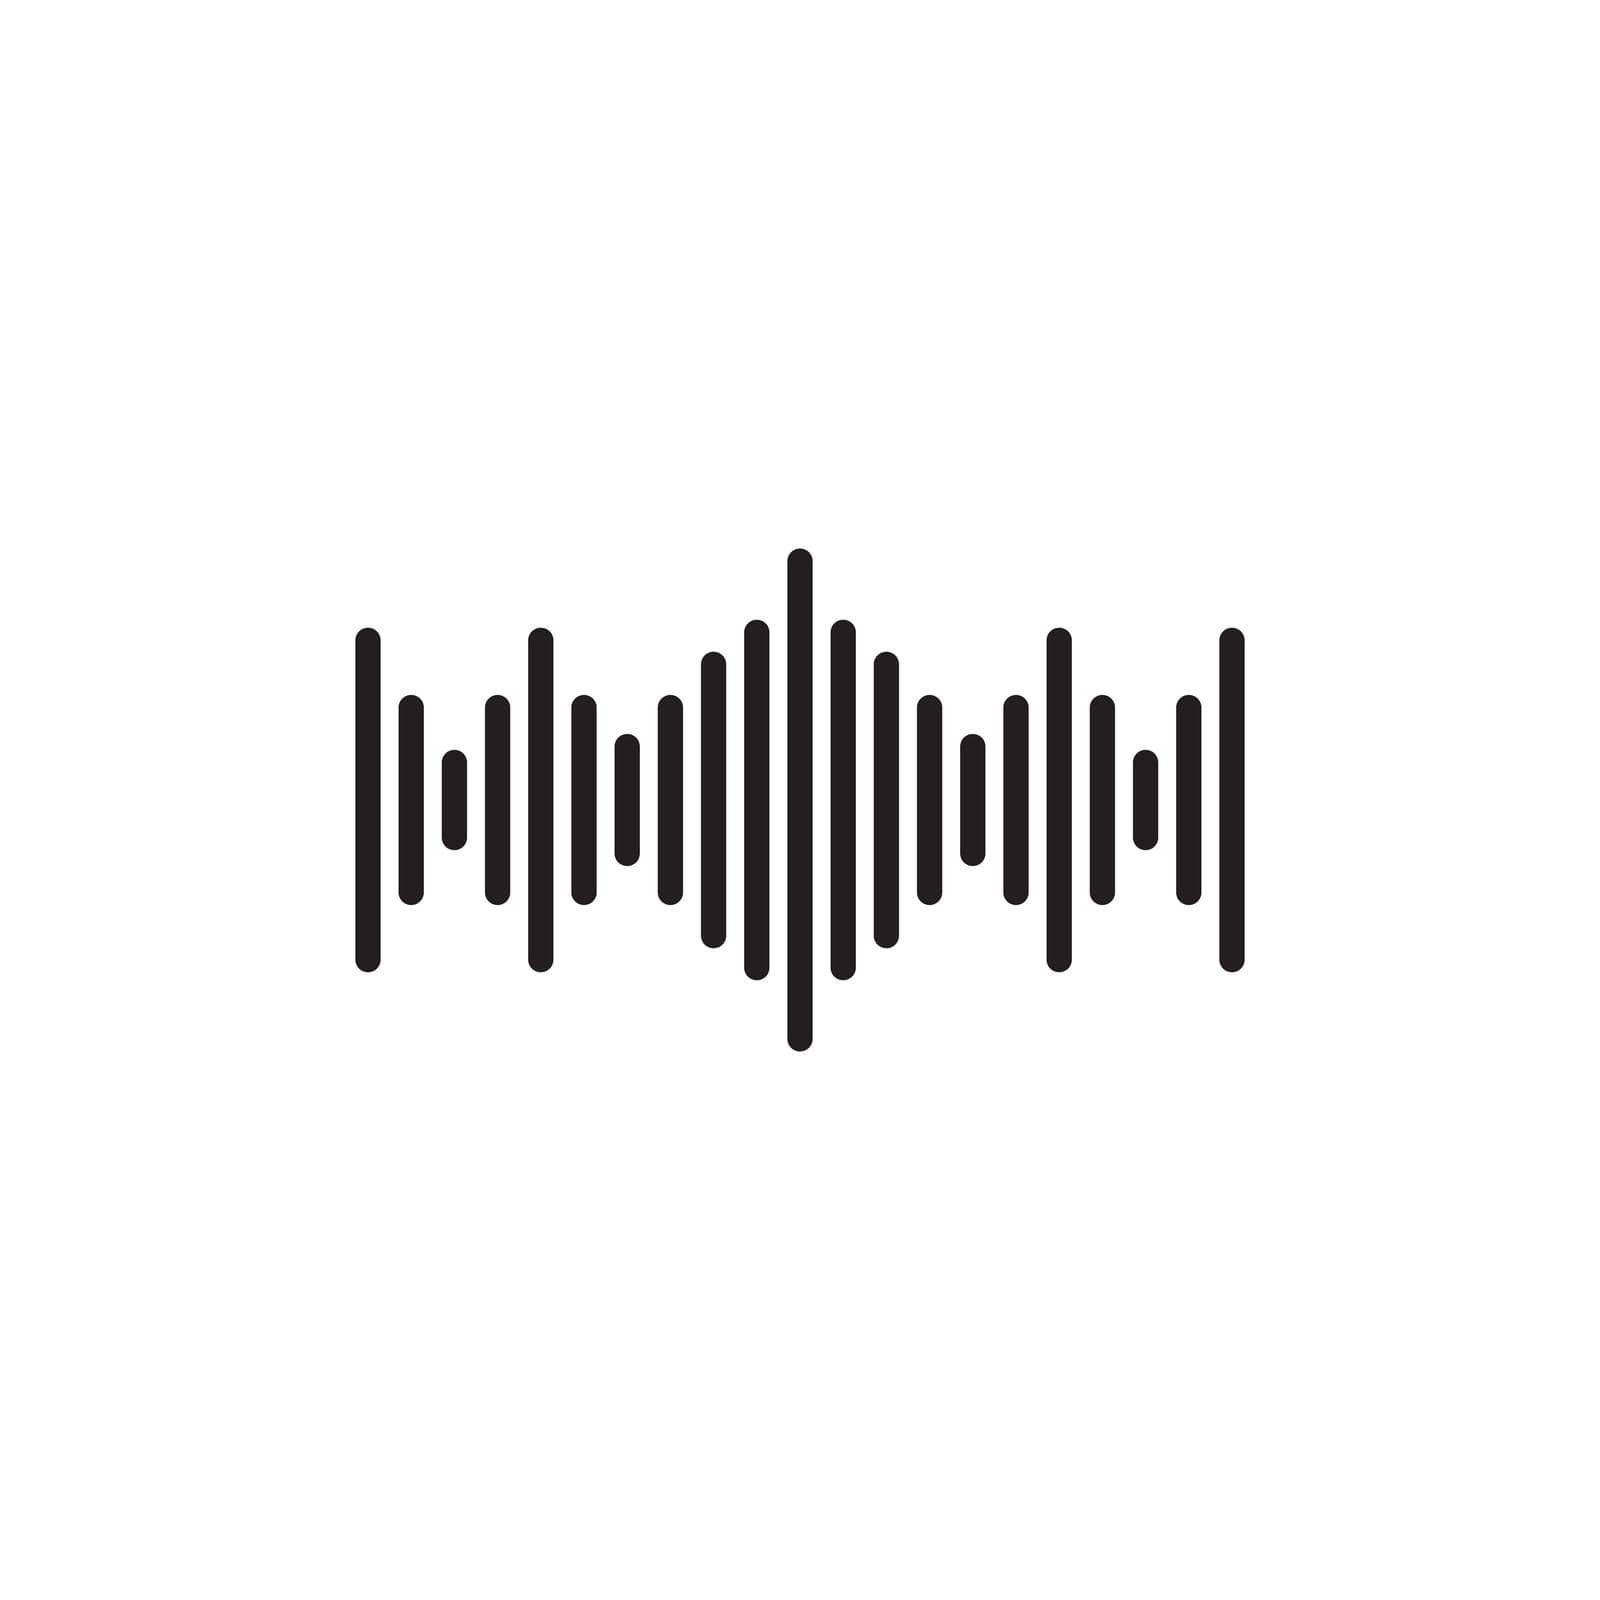 Sound waves vector illustration by Mrsongrphc